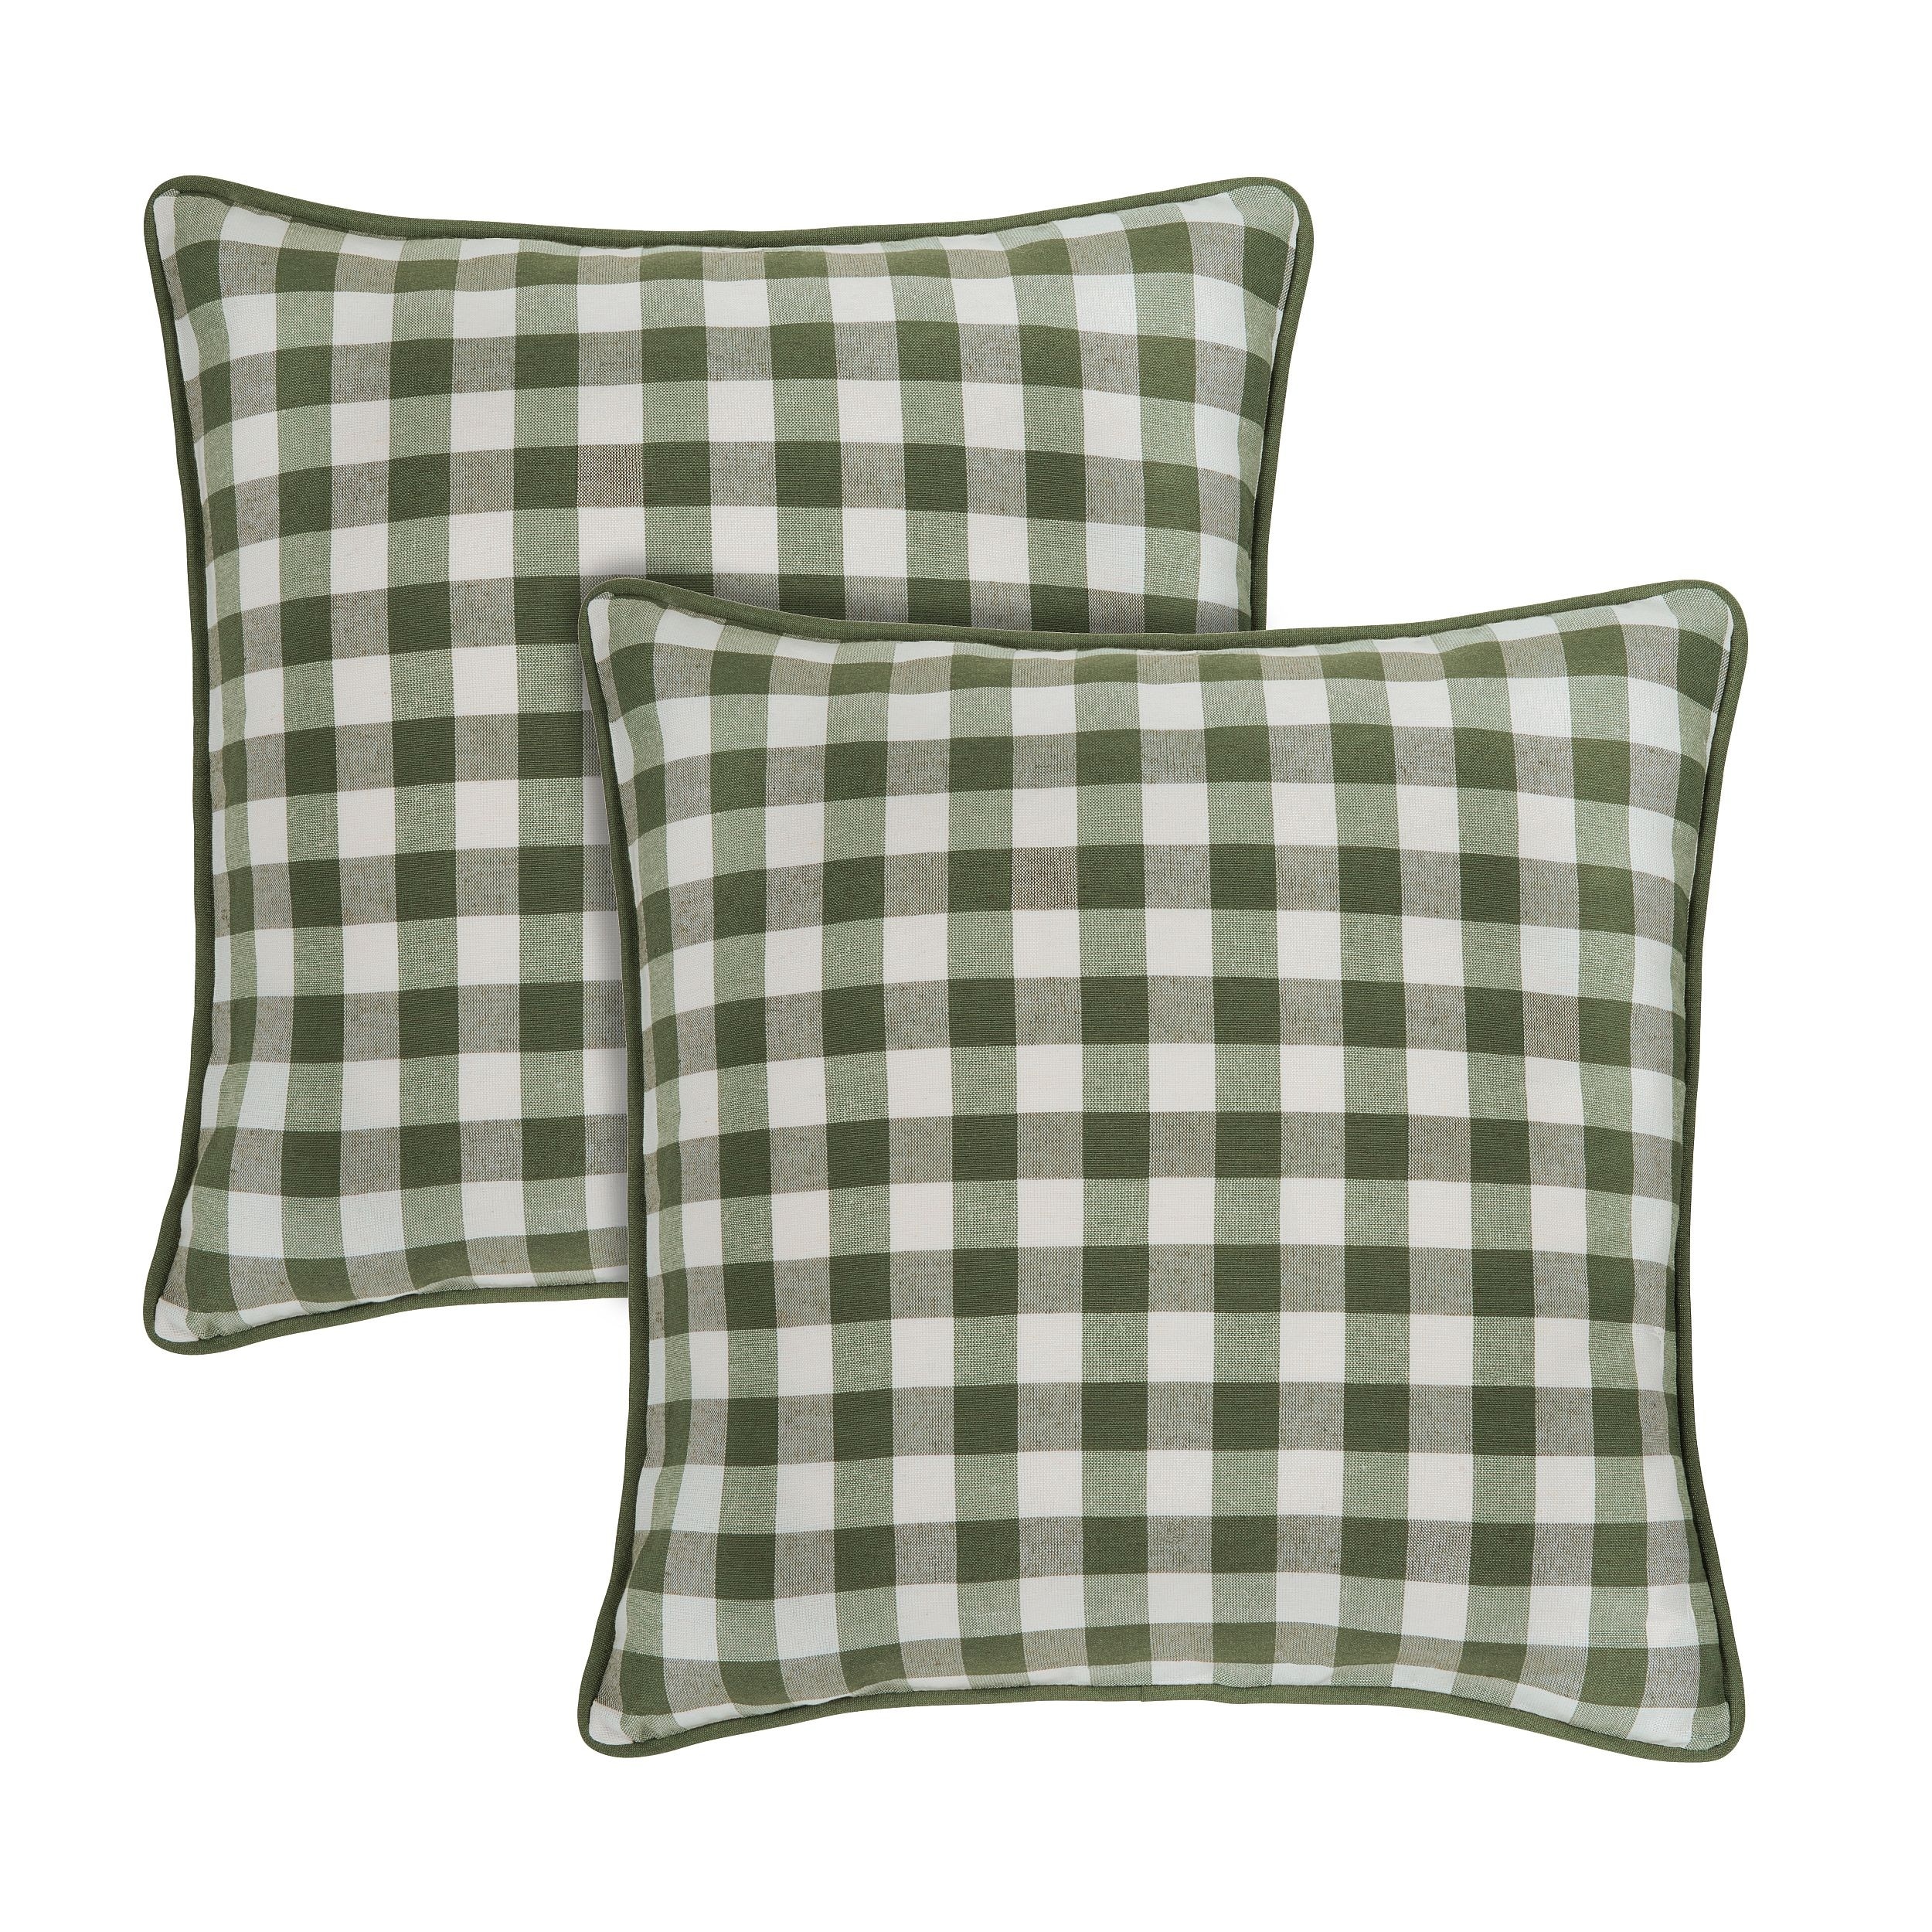 Plaid PILLOW COVER Cushion Case White Red Buffalo Check Checkered 2-Sided  18x18"